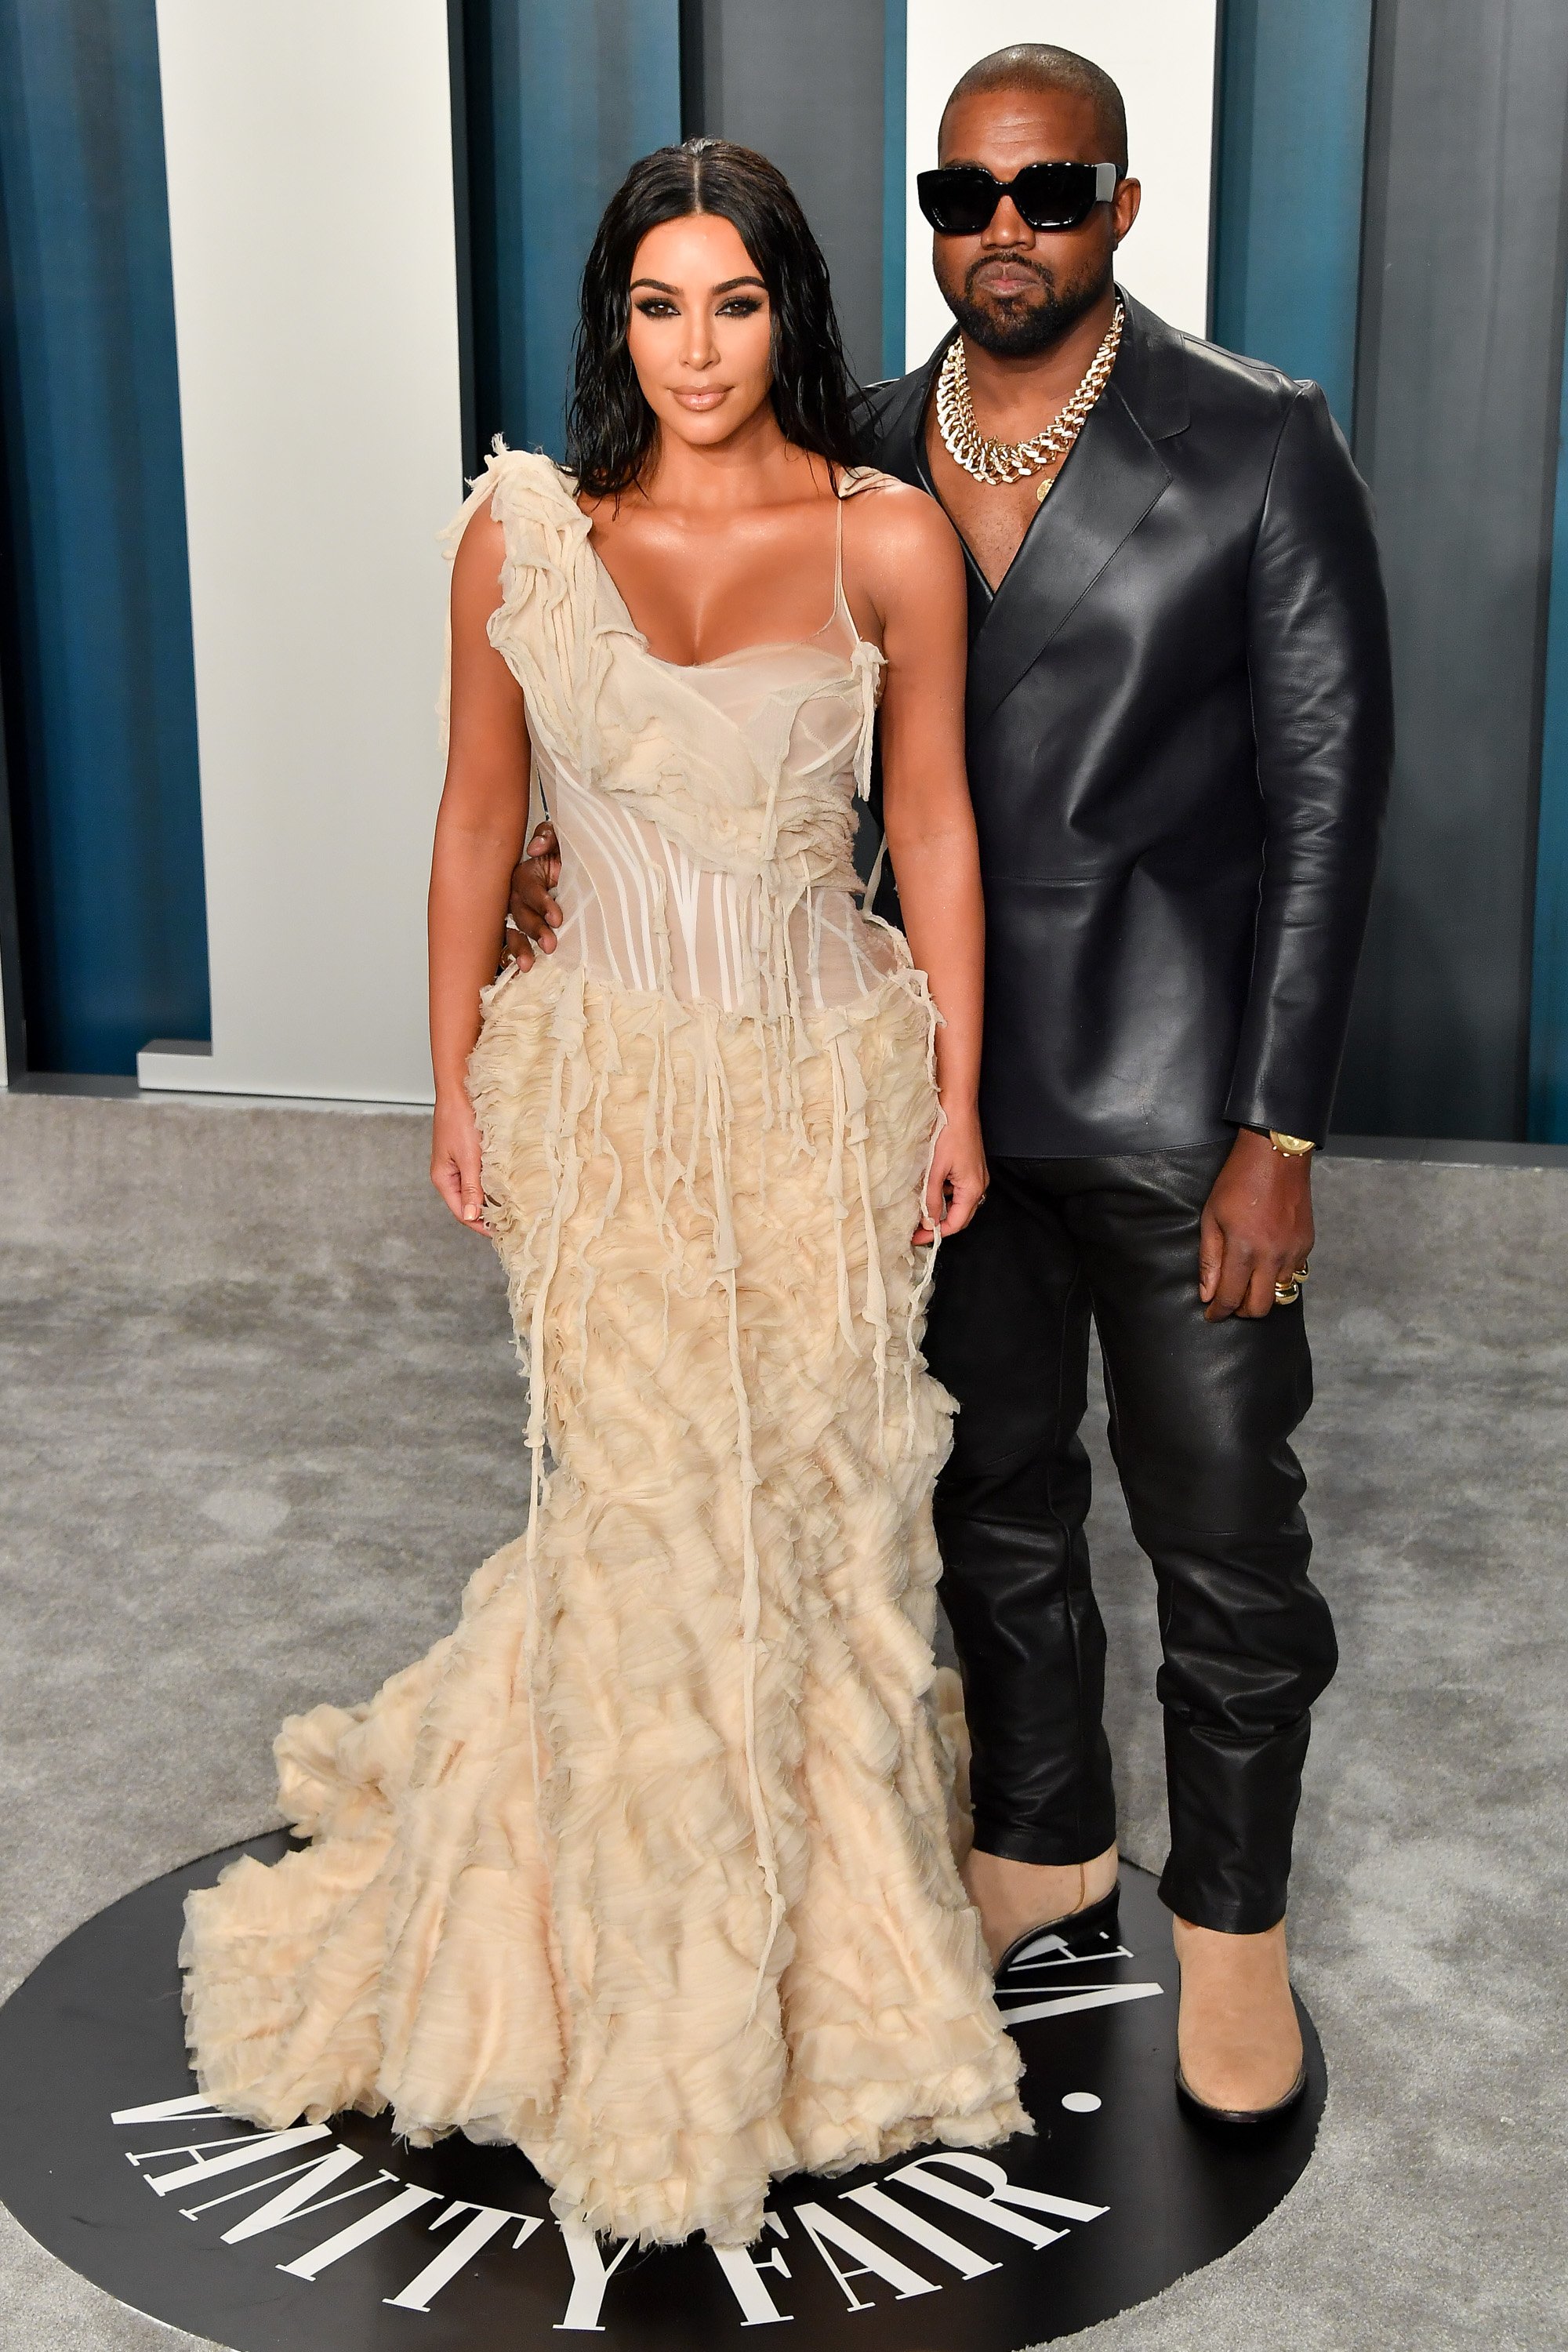 Kim Kardashian West and Kanye West arrive at the 2020 Vanity Fair Oscar Party on February 09, 2020, in Beverly Hills, California. | Source: Getty Images.